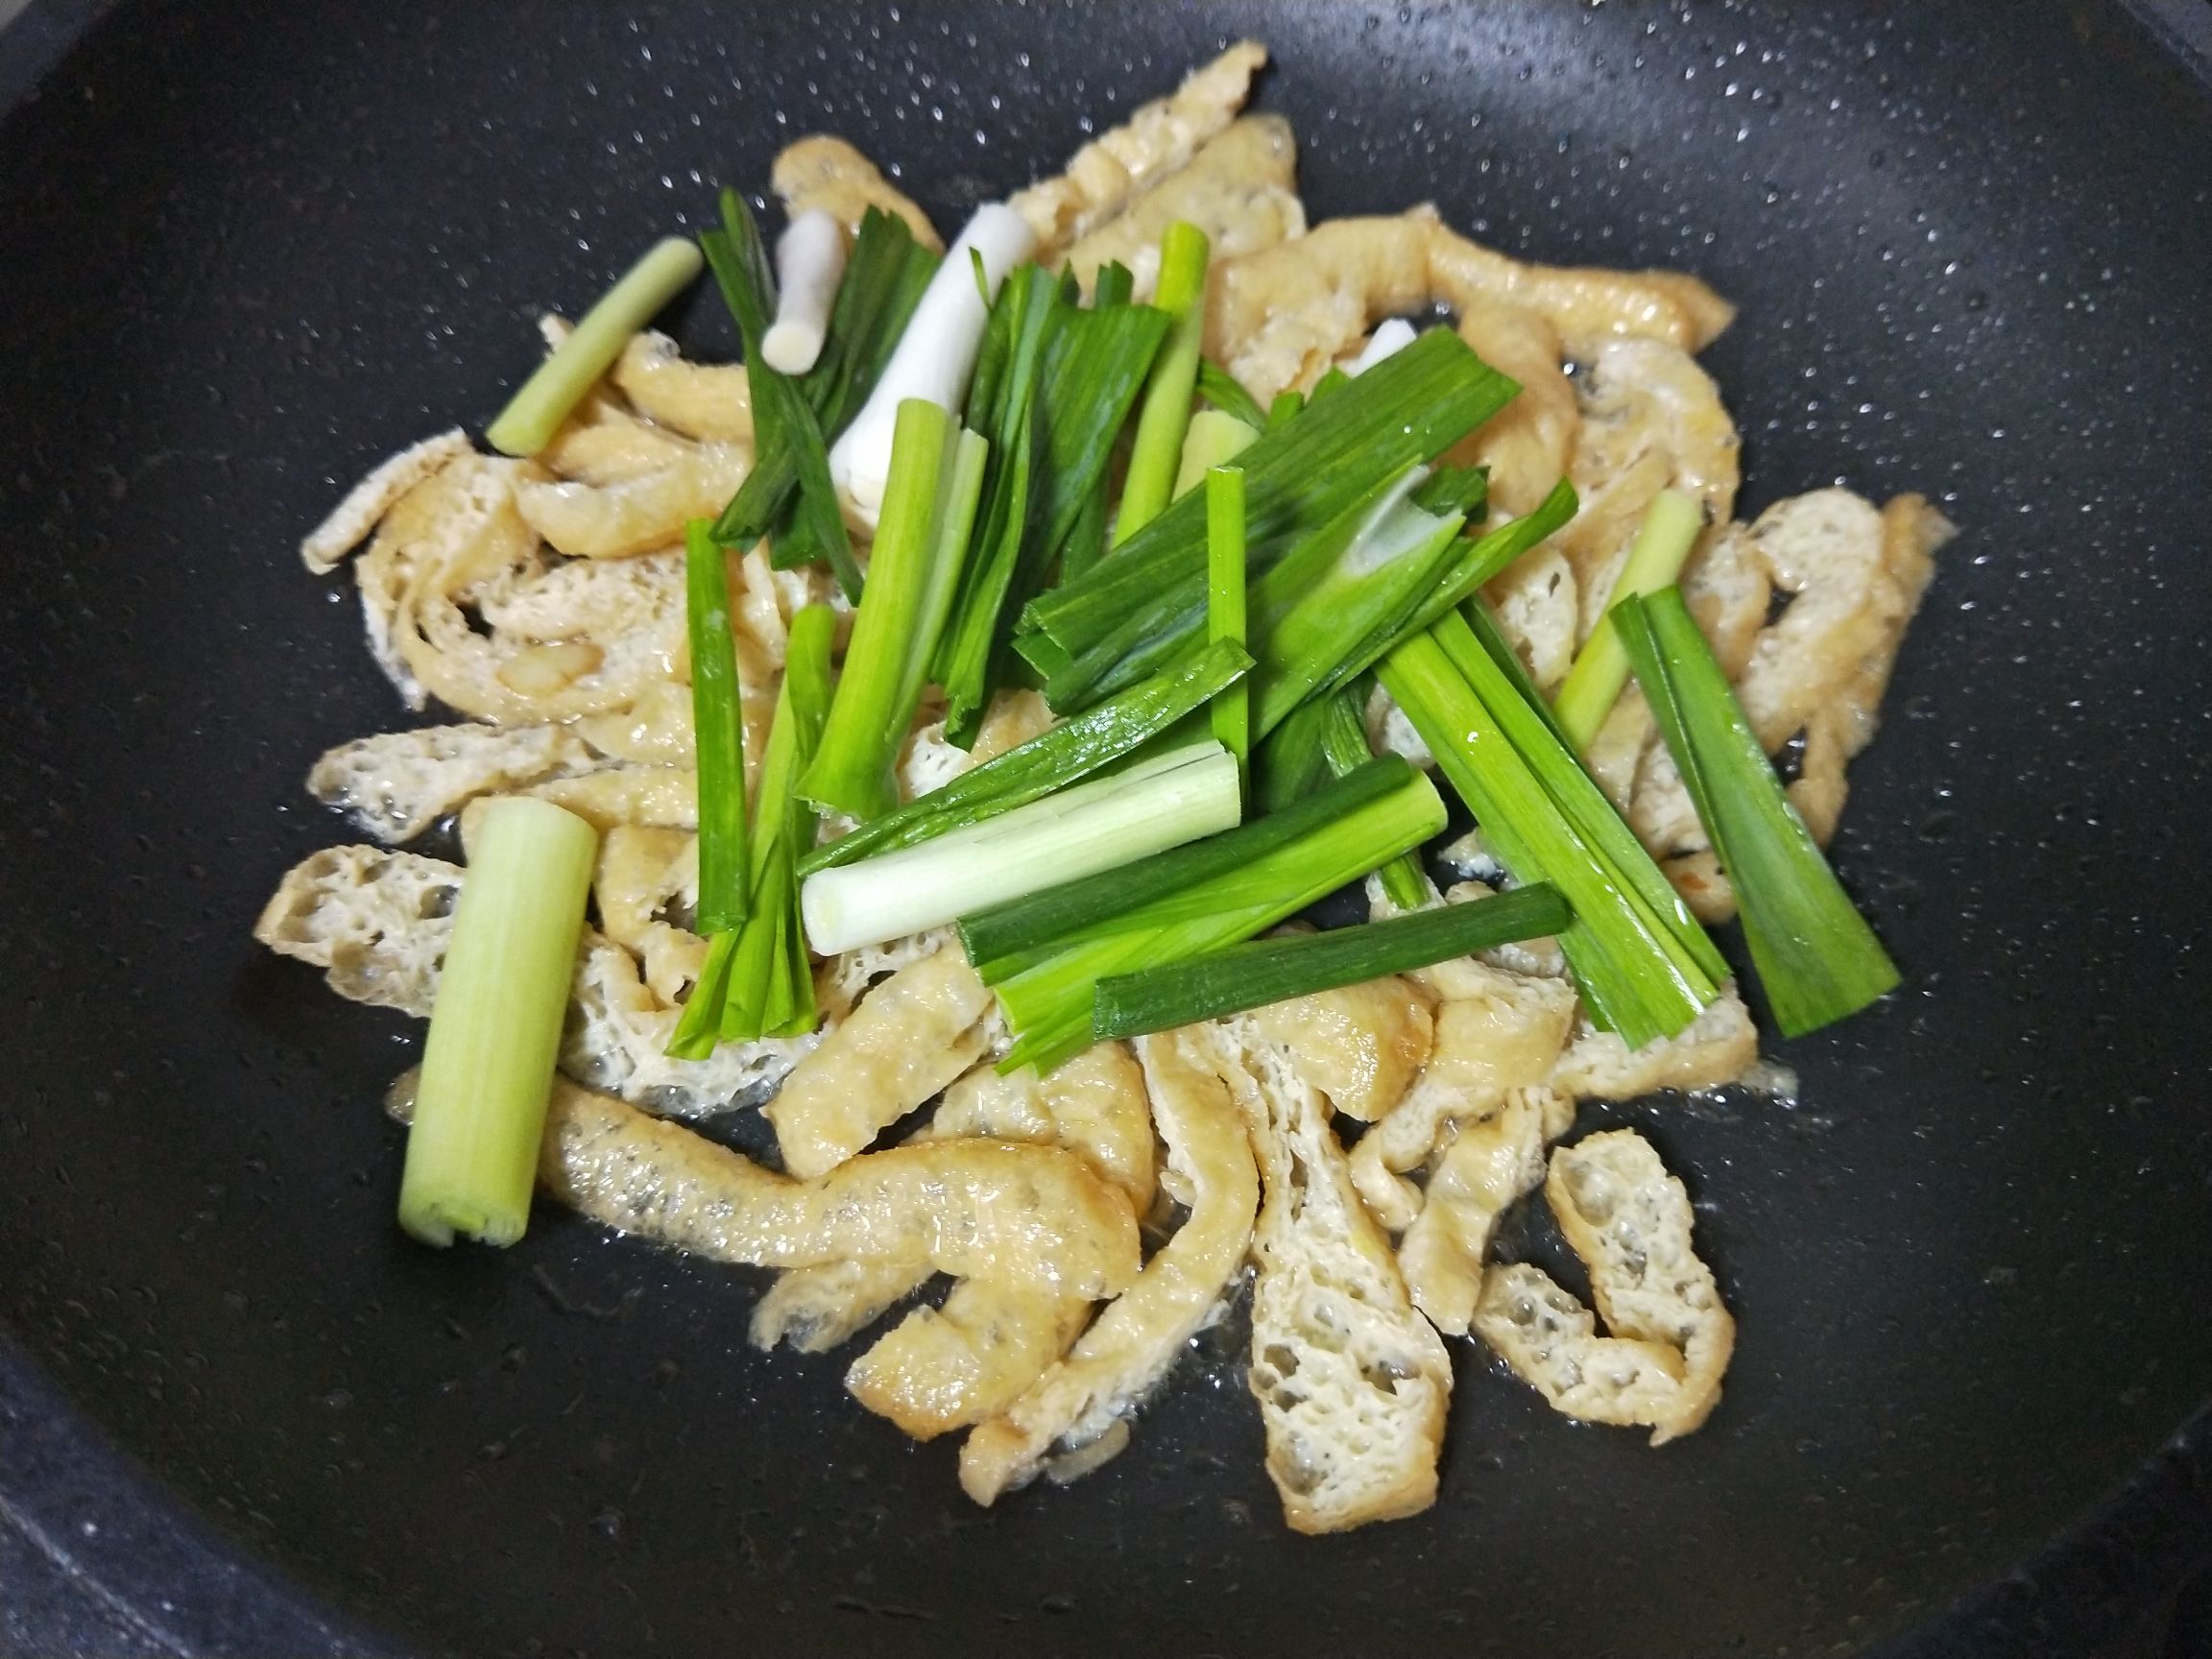 Sauteed Fried Noodles recipe